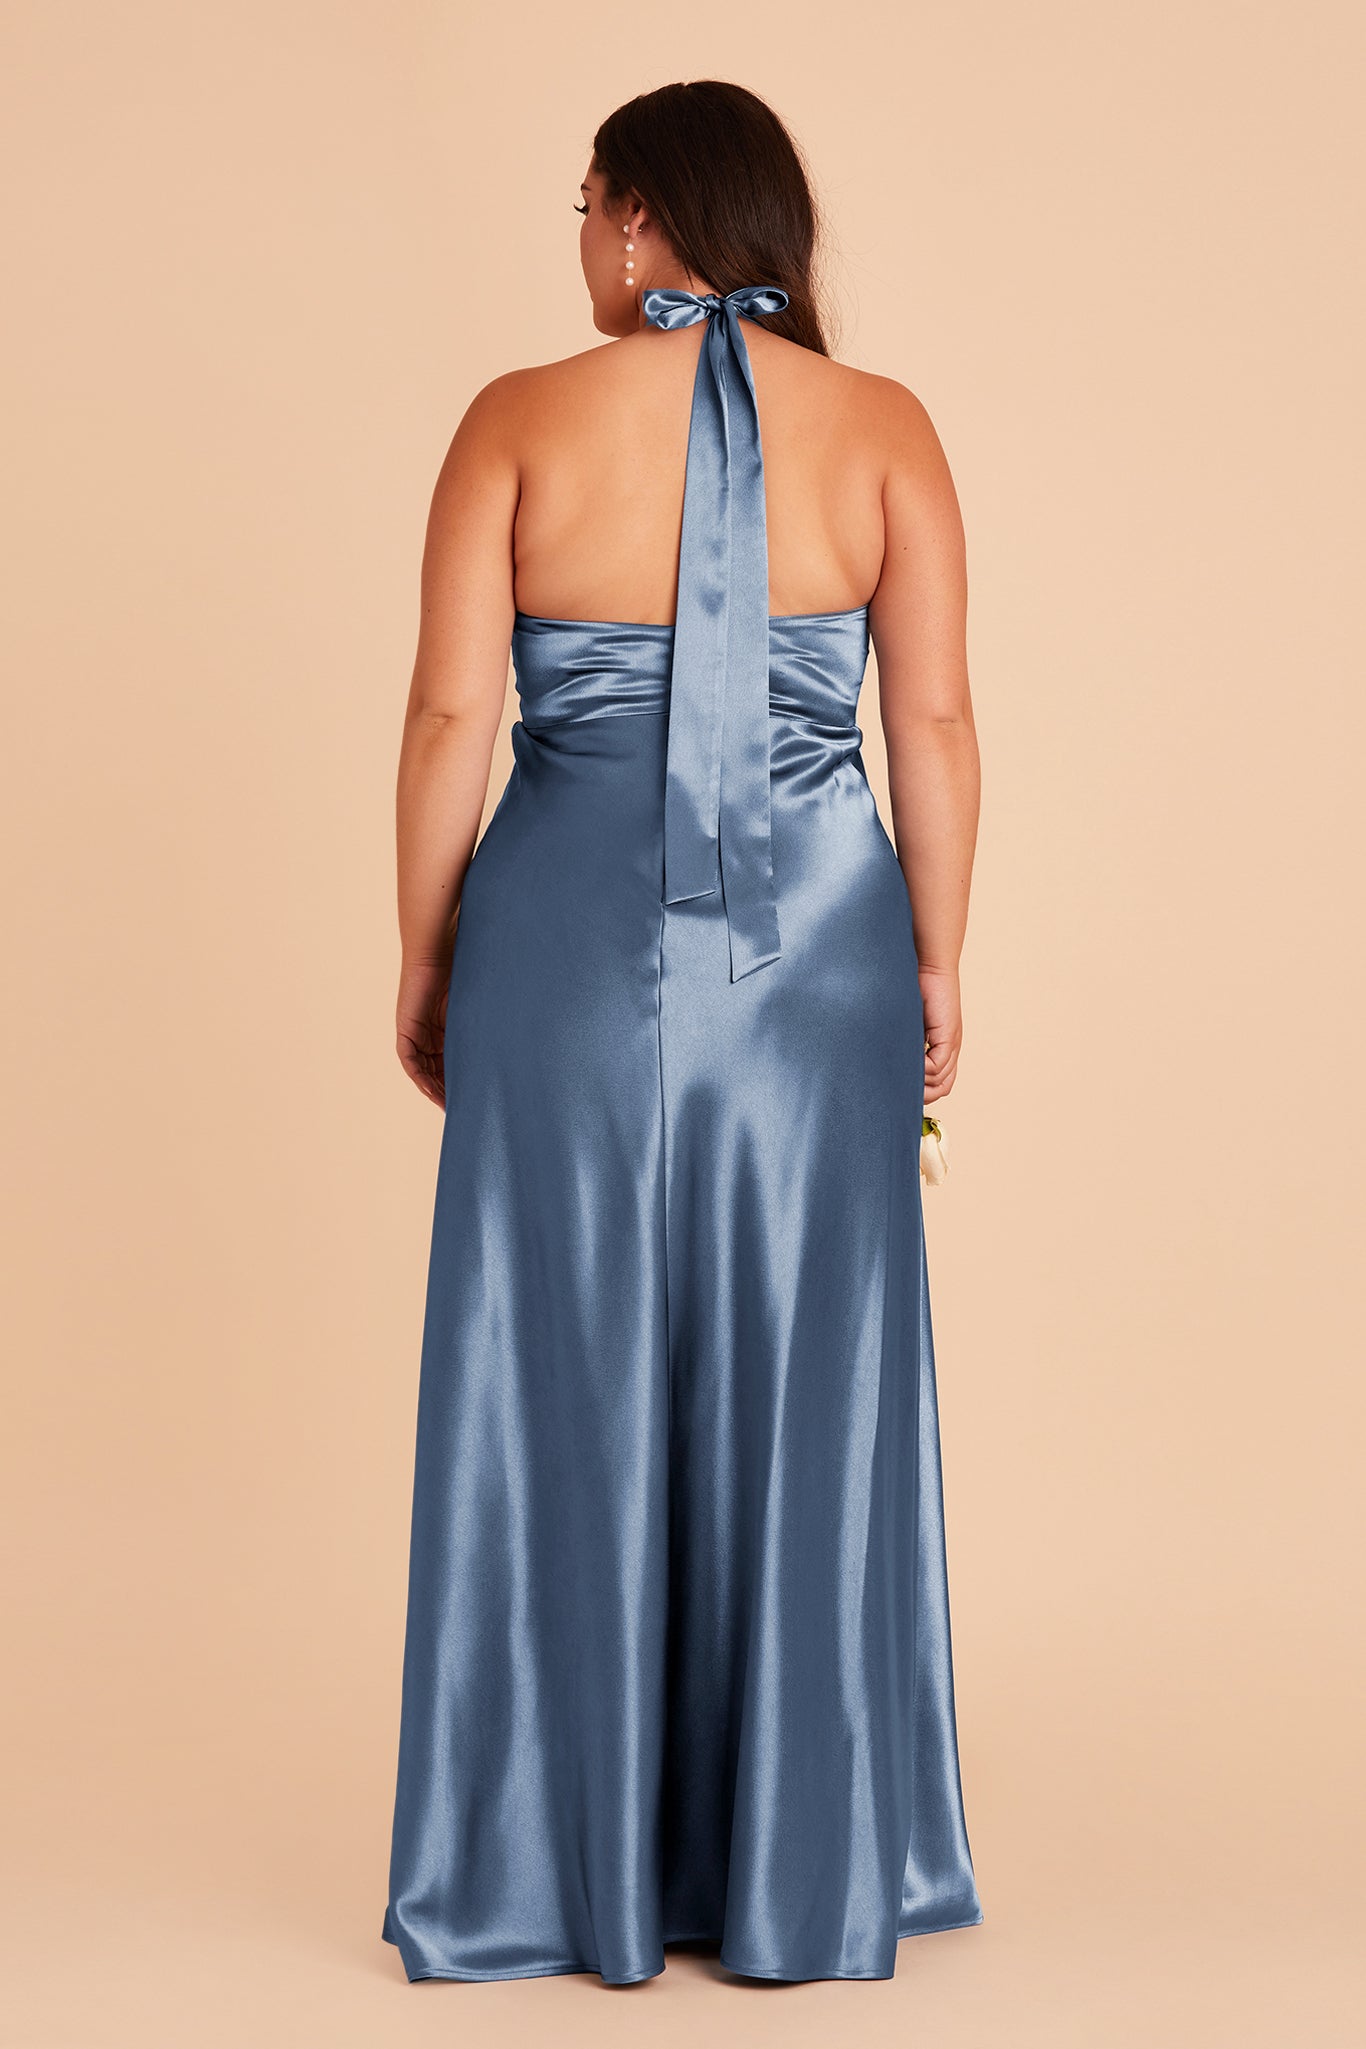 Monica plus size bridesmaid dress with slit in twilight satin by Birdy Grey, back view